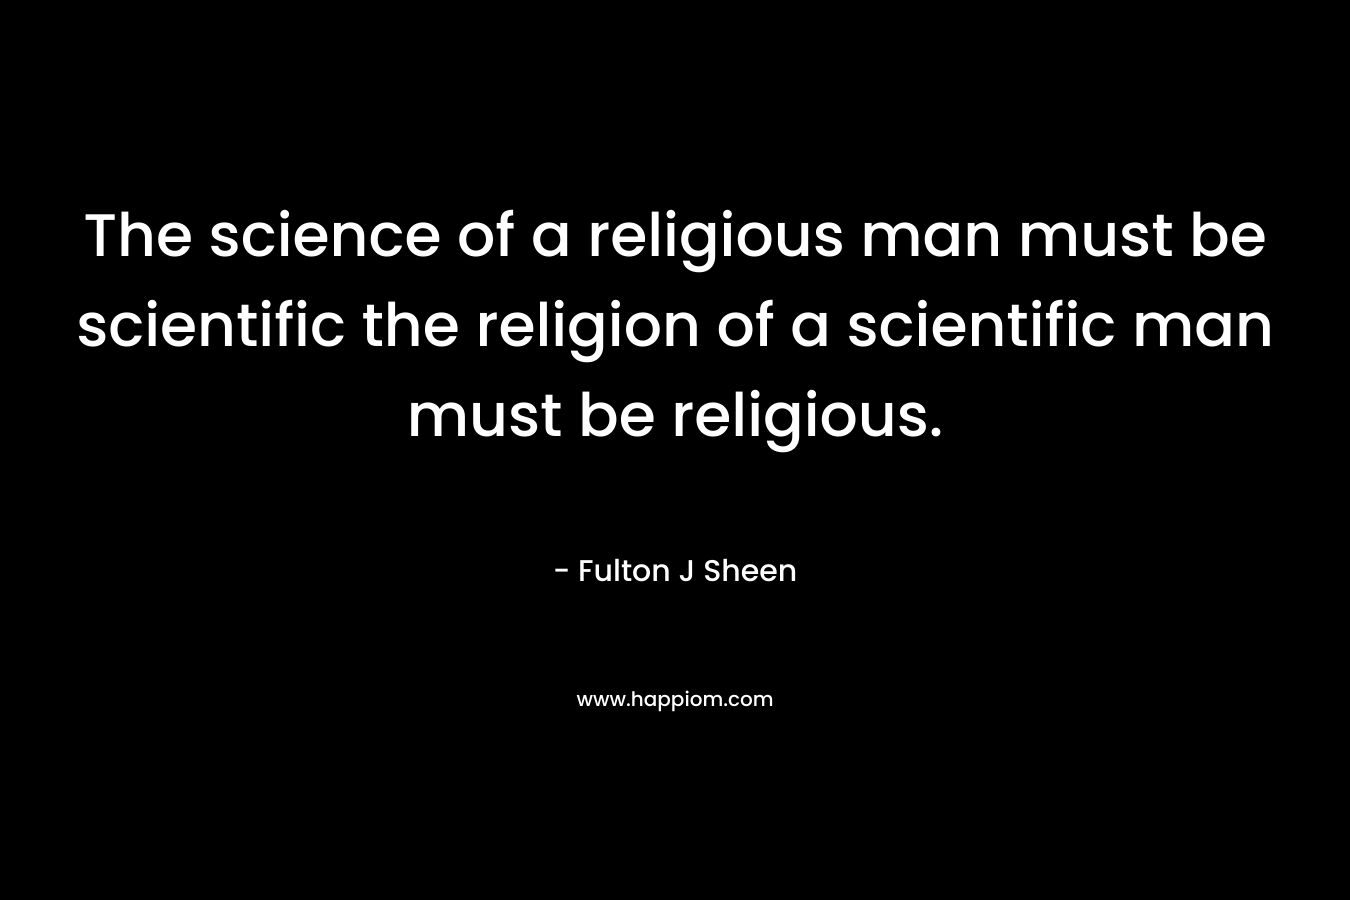 The science of a religious man must be scientific the religion of a scientific man must be religious.